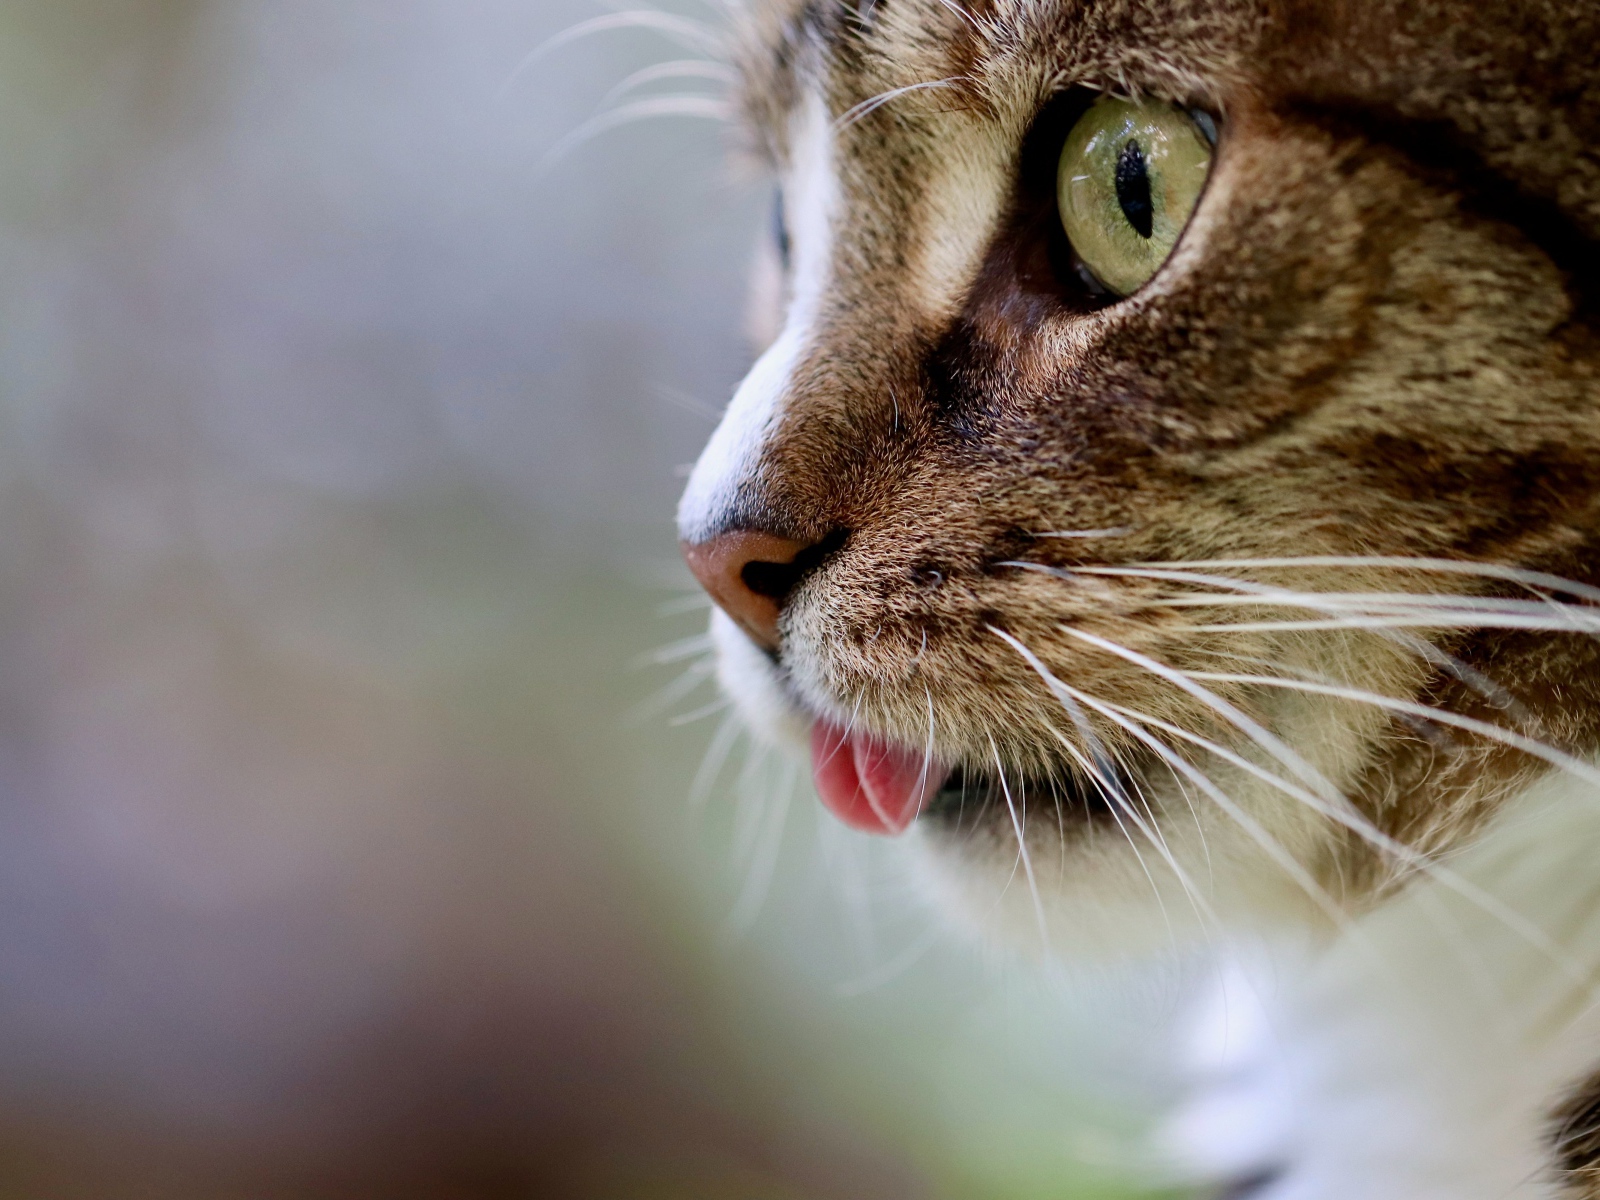 The muzzle of a cat with a protruding tongue